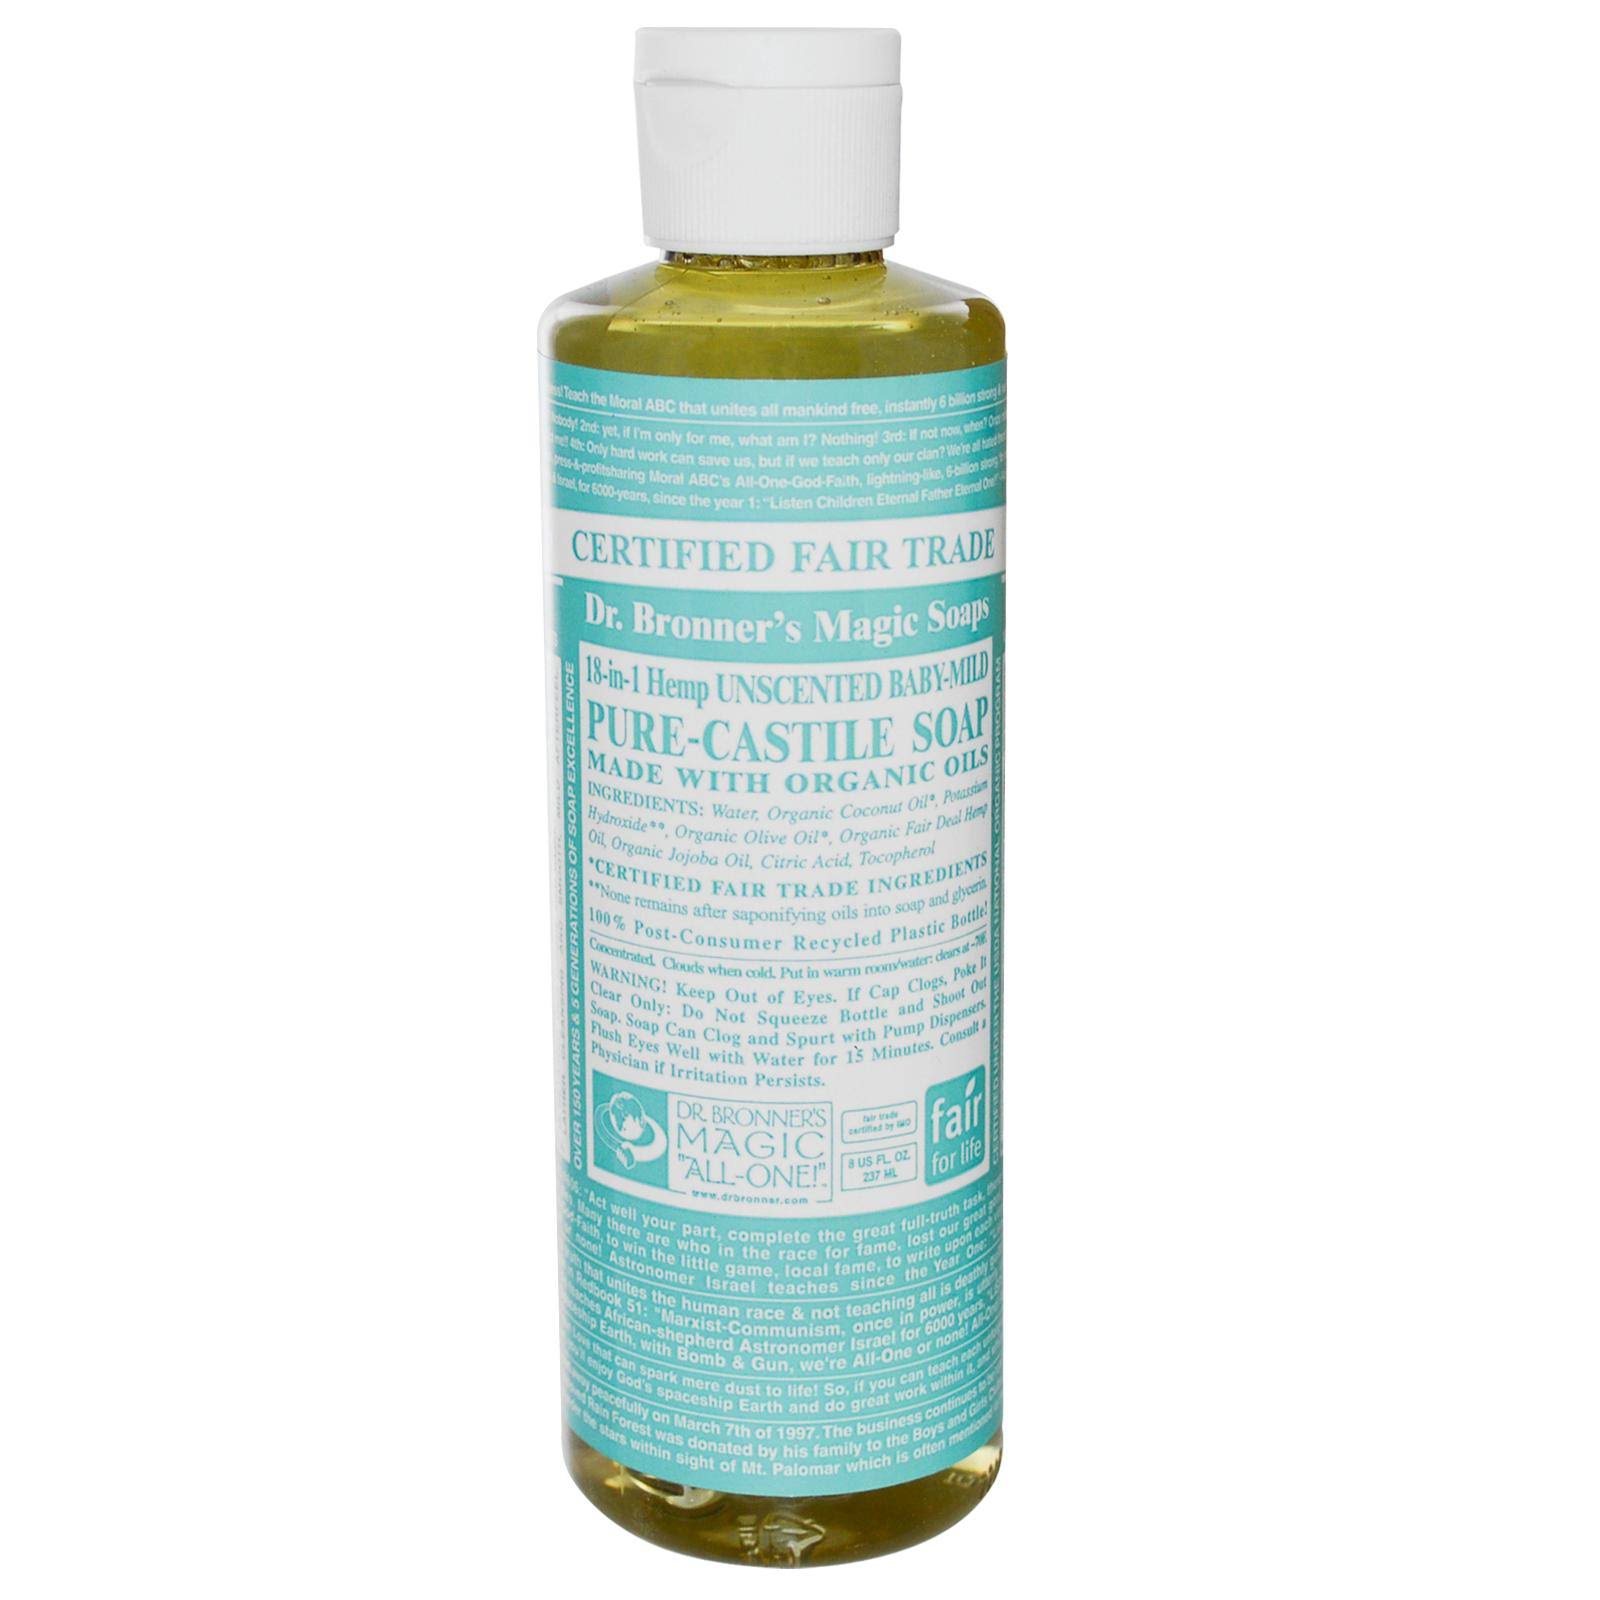 Dr. Bronner's Organic Pure Castile Unscented Liquid Baby Soap